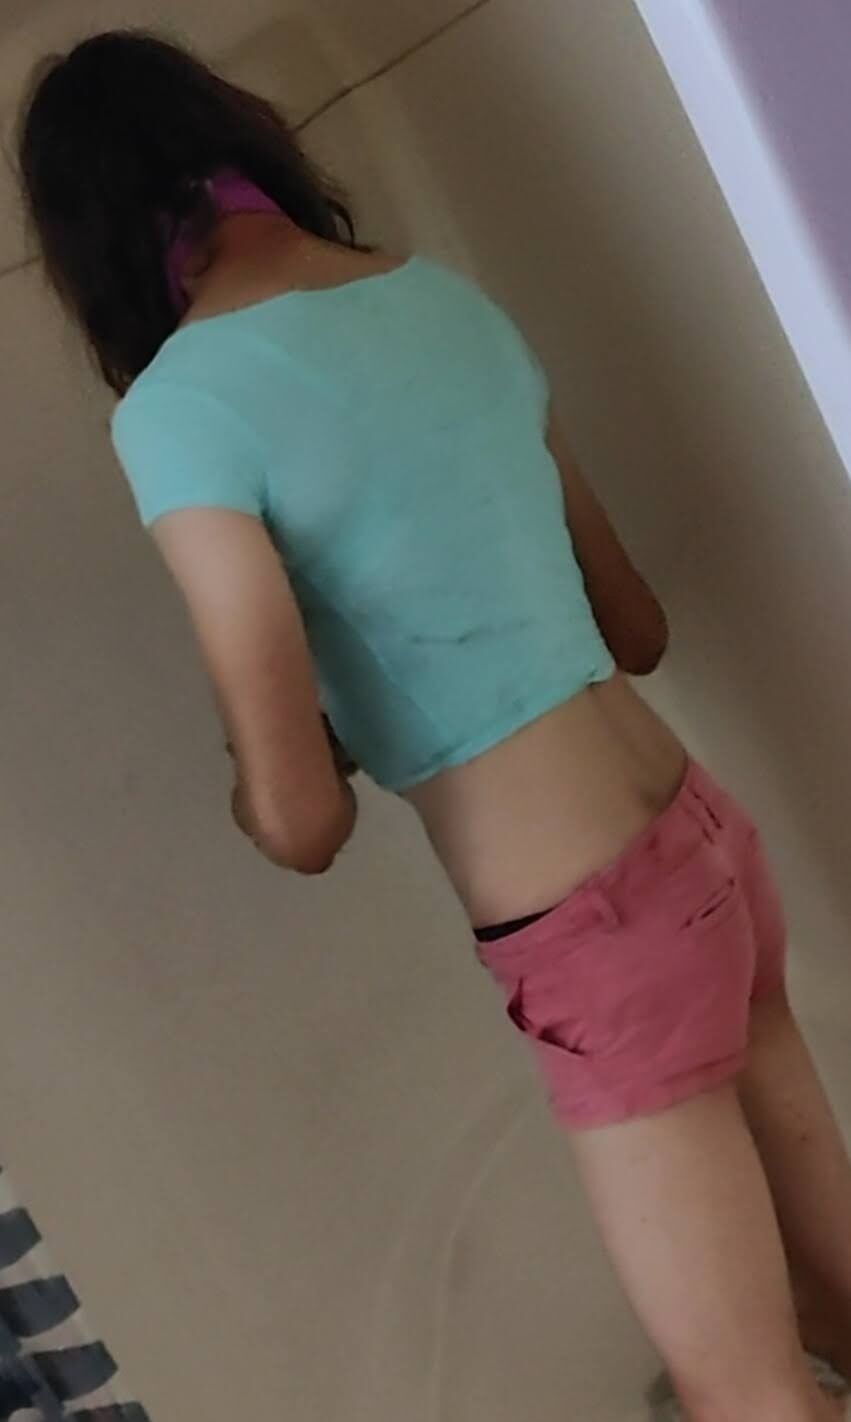 Trying on outfits and playing around some pics by request #13